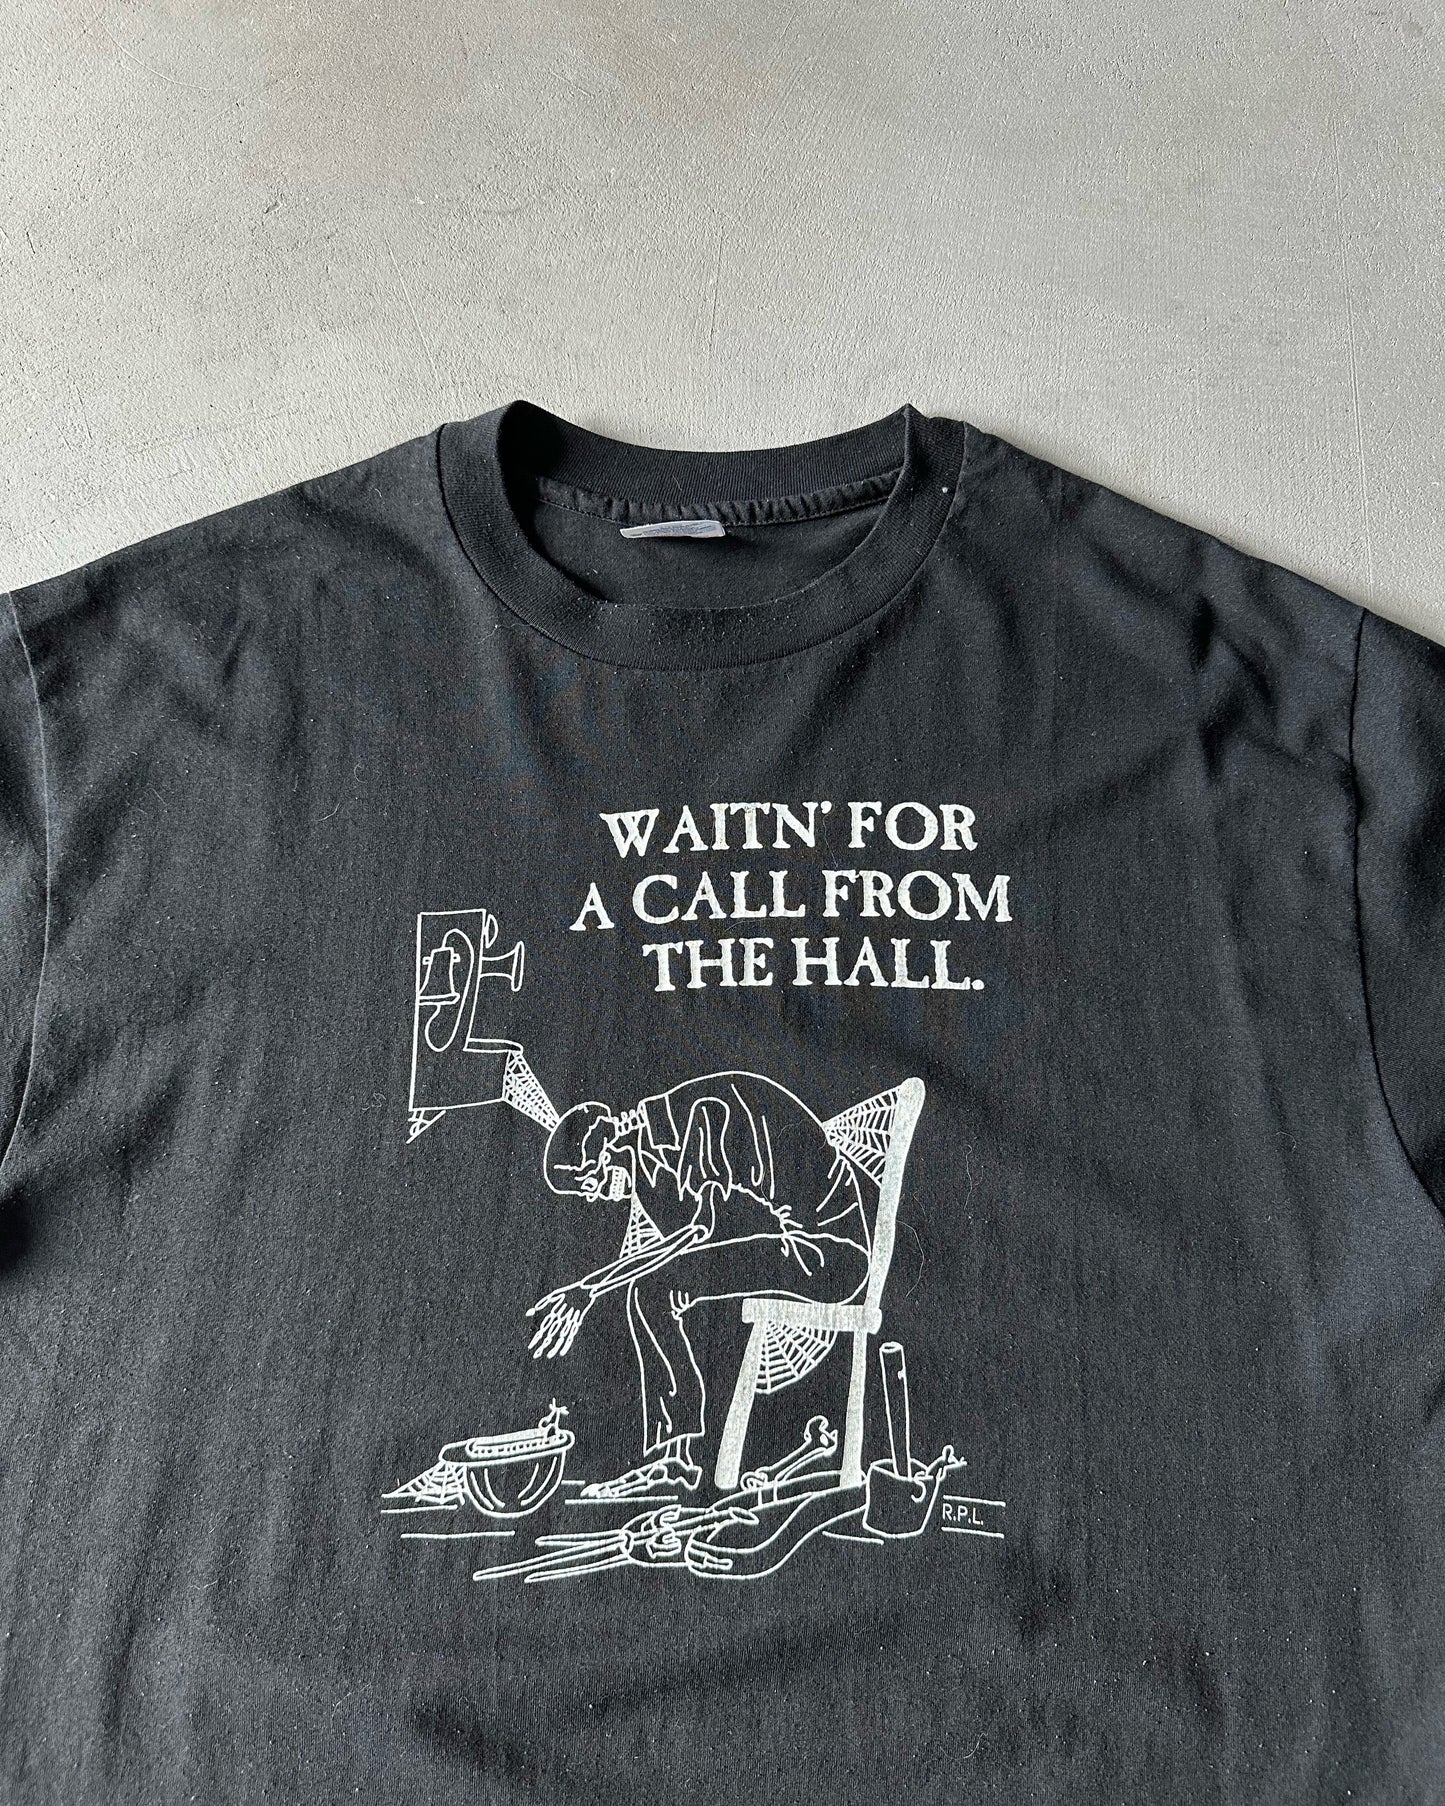 1990s - Black "Call From The Hall" T-Shirt - XL